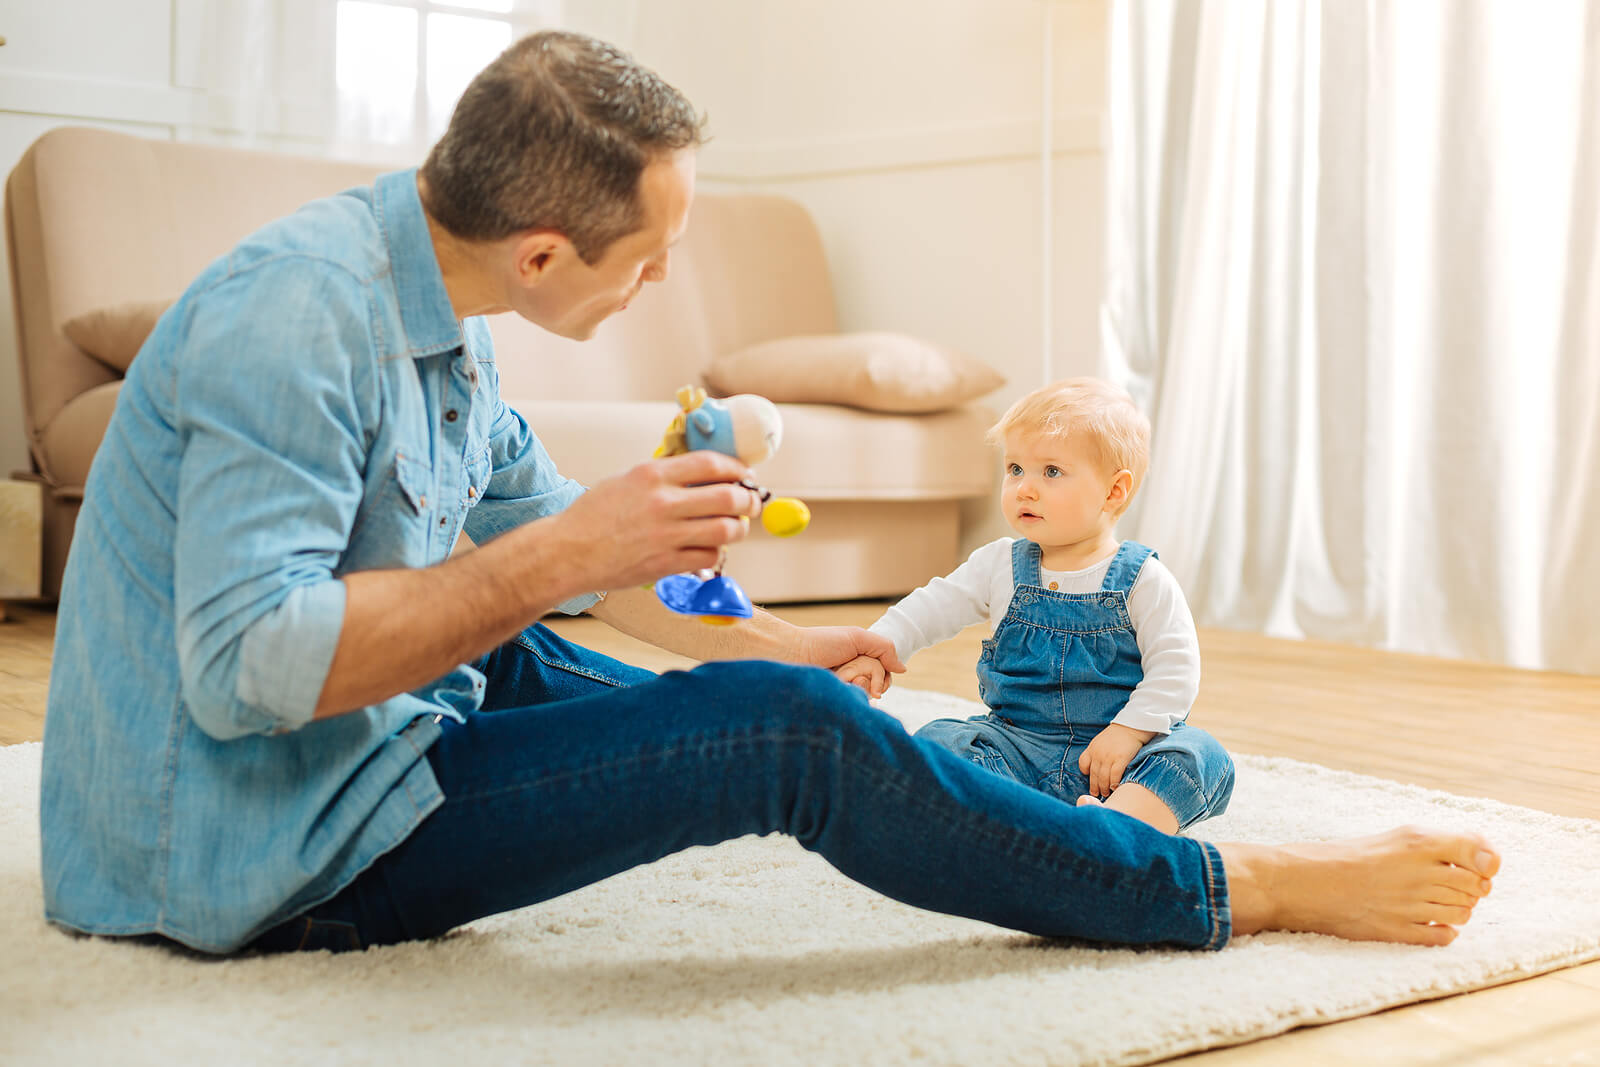 A father entertaining his child with a toy.